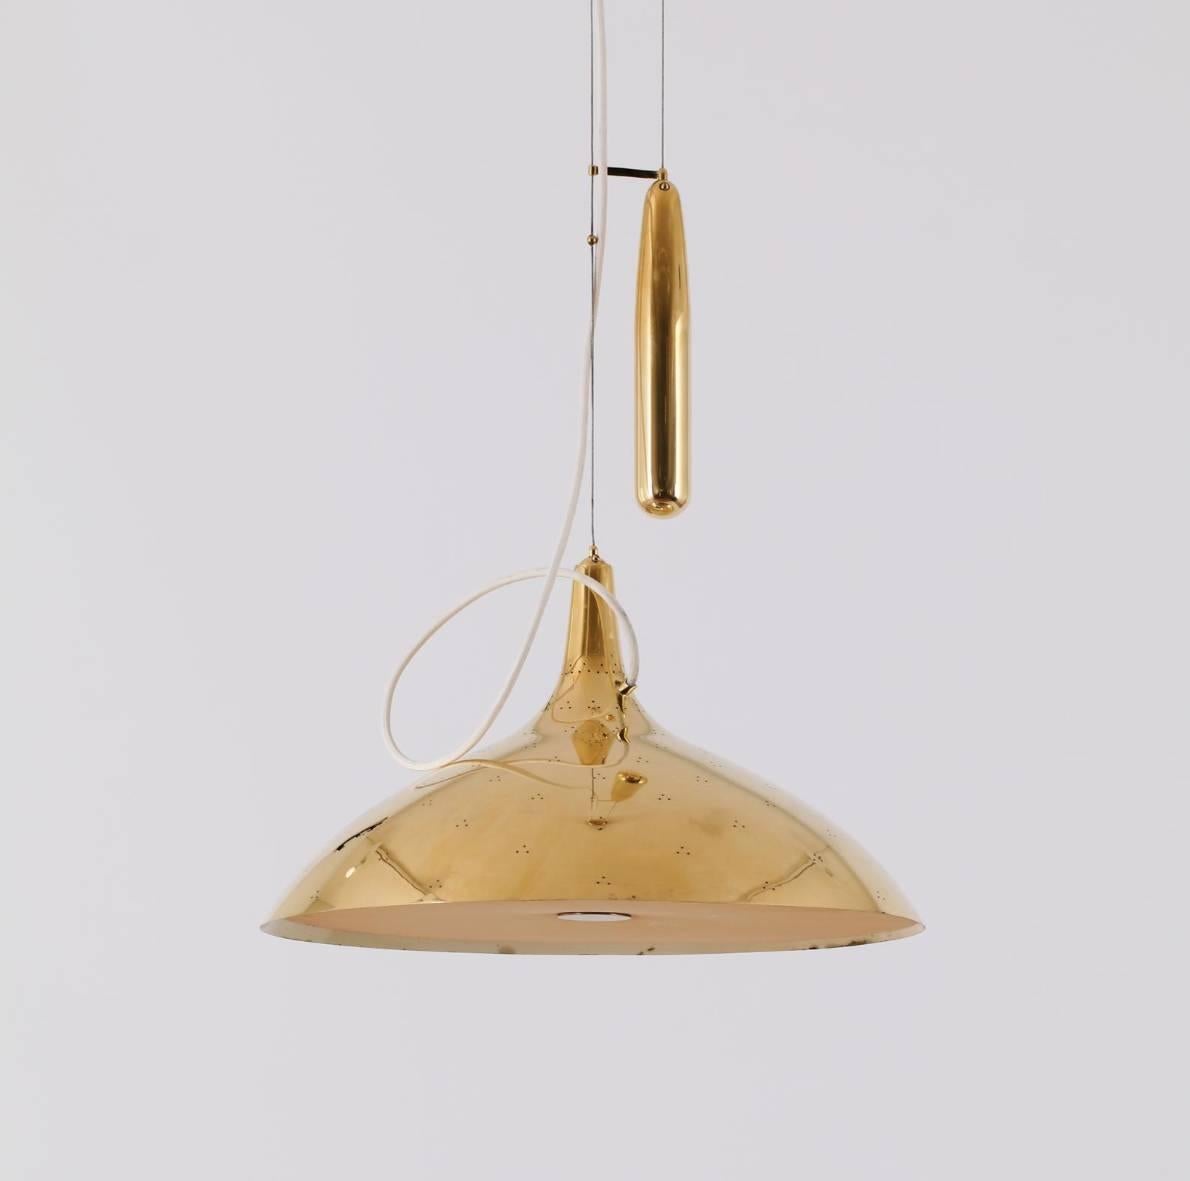 A very nice early example of the classic A1965 counter balance / elevating brass pendant lamp designed by Paavo Tynell for Taito Oy in the 1950s. Wonderful condition with the rare original nylon diffuser attached. Stamped with makers mark.